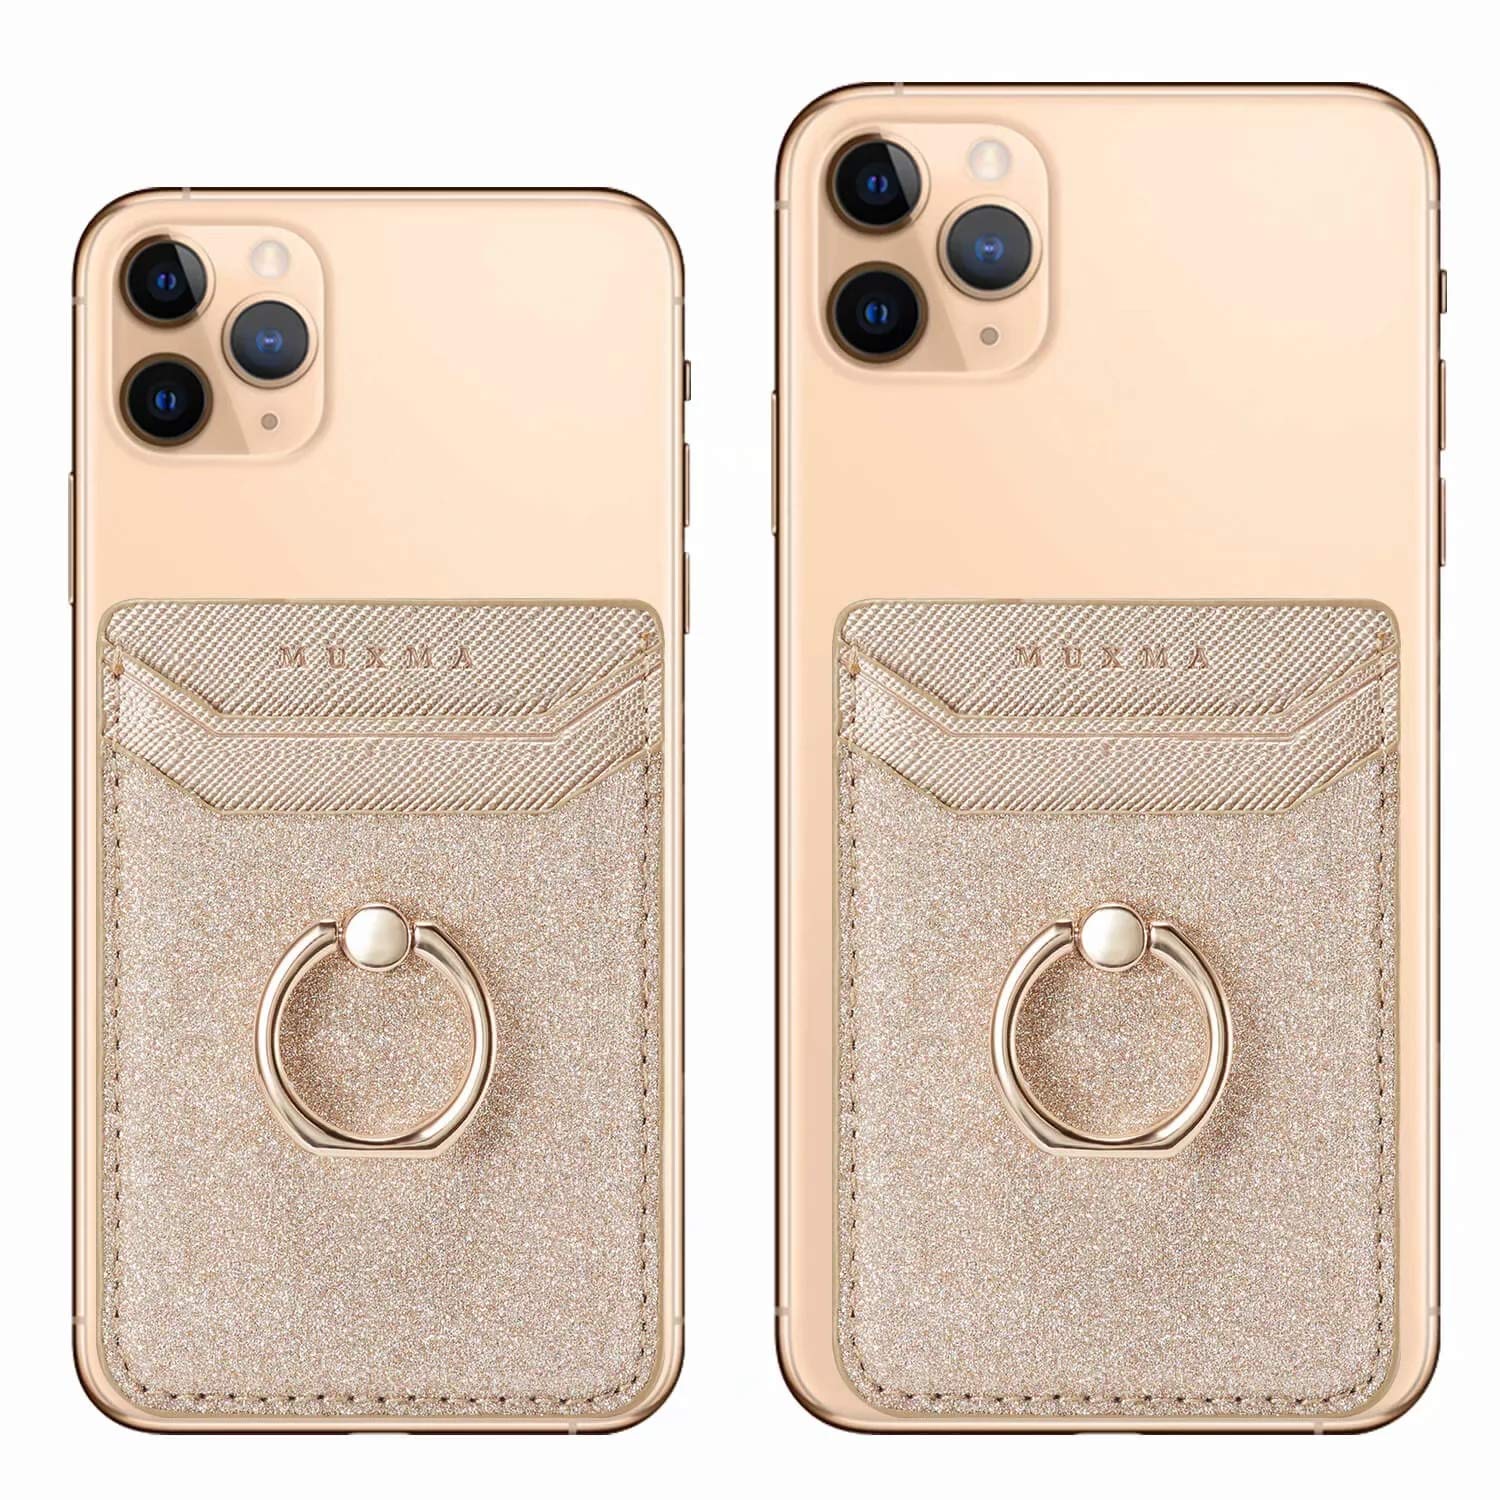 Phone Card Holder Sleeve RFID Credit Wallet with Kickstand Ring for Women, DMaos 2 Pieces Glitter Sands Wallet Stick-On Back Grip for iPhone Samsung Android and Smartphones - Pink + Gold